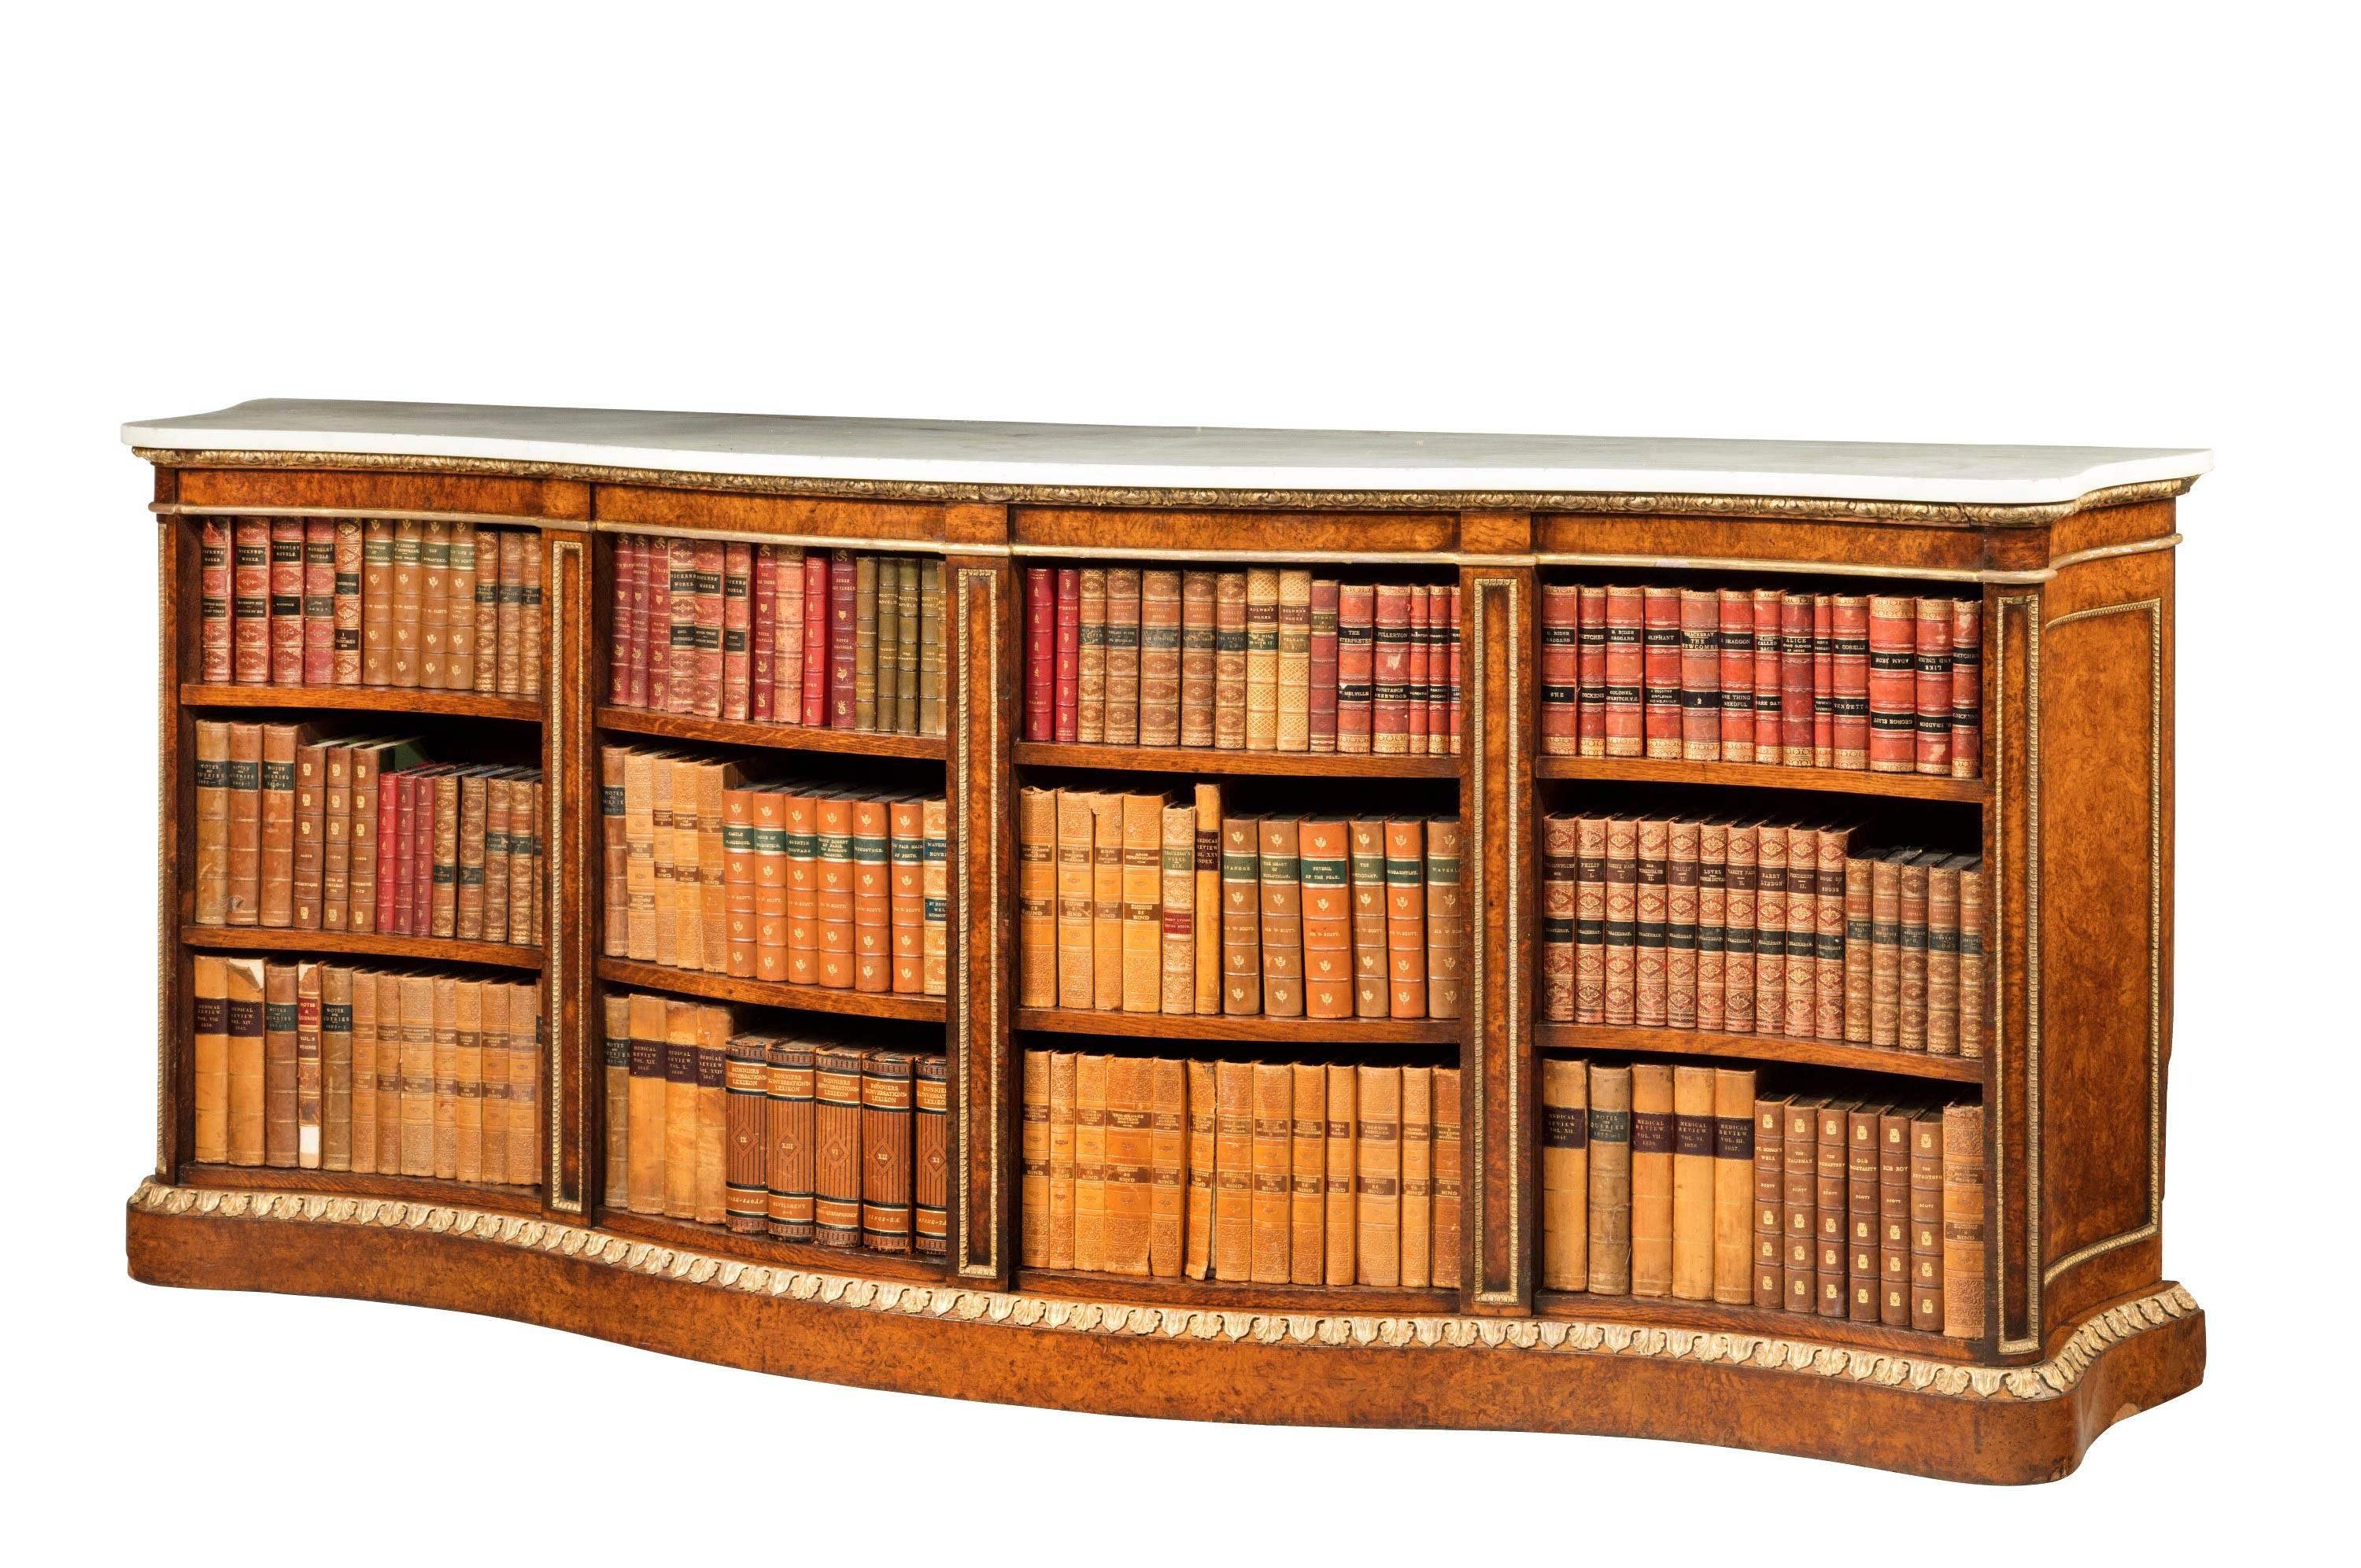 A rare mid-19th century burr oak open bookcase of serpentine form retaining the original white shaped marble top. The carcass enriched with gilded decoration. Ex Lotherton Hall, the family seat of the Gascoigne family, which is now a museum.